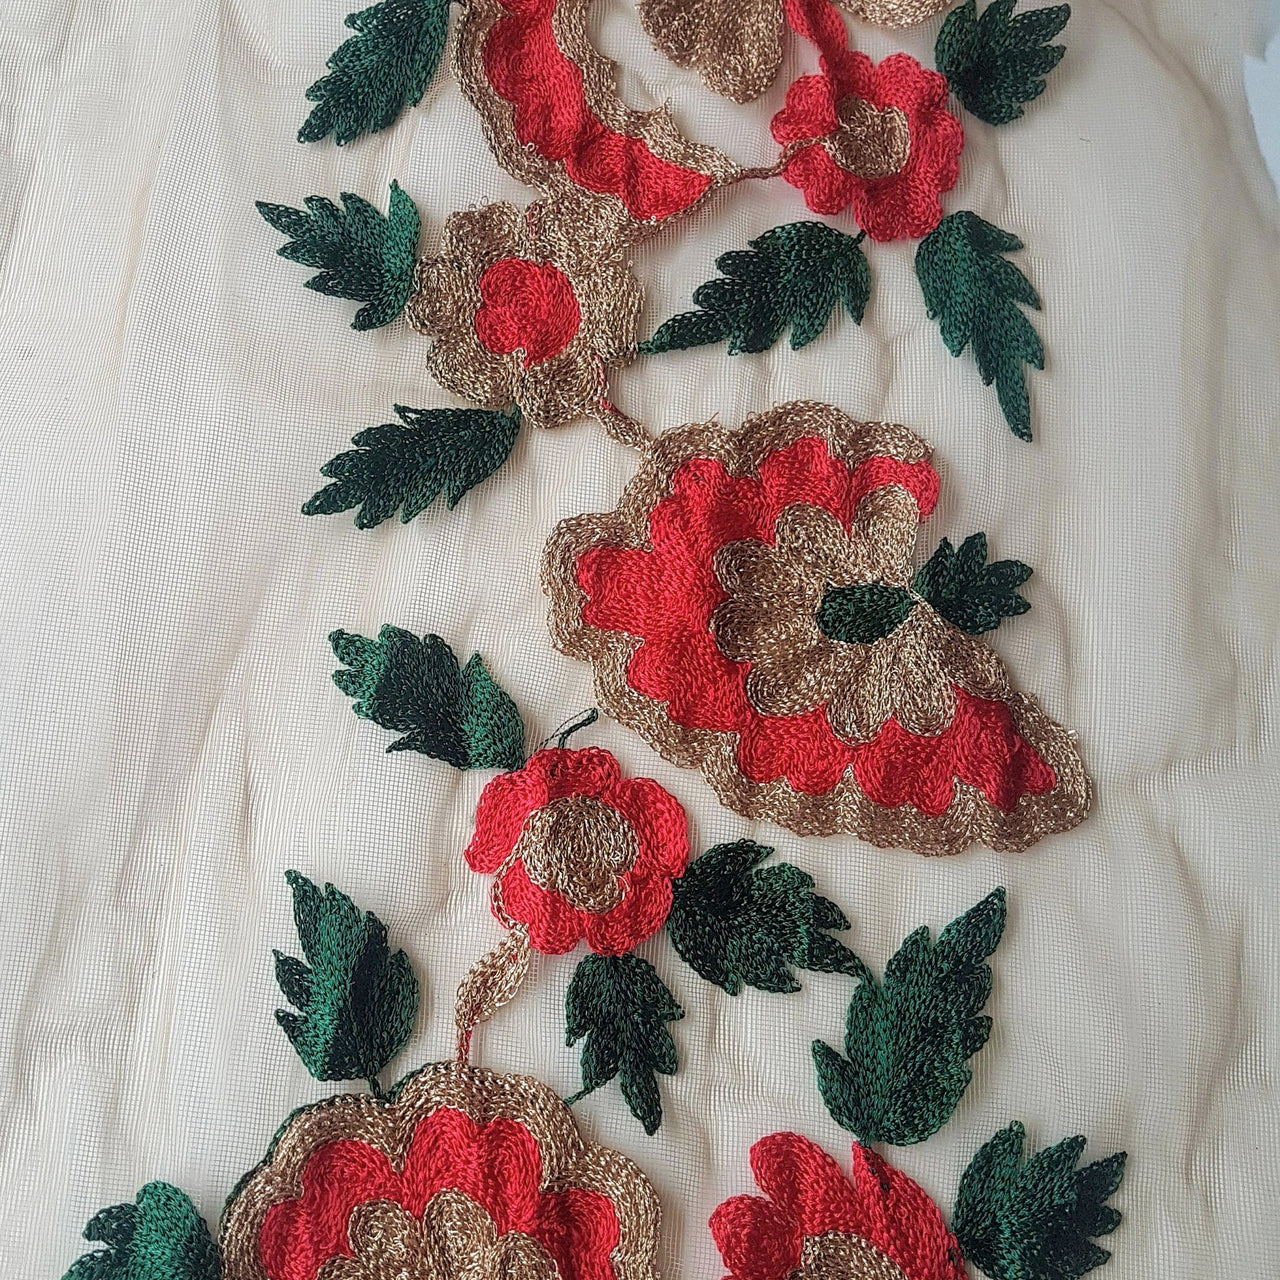 Beige Soft Net Lace Trim With Red, Green And Gold Floral Embroidery, Indian Trims